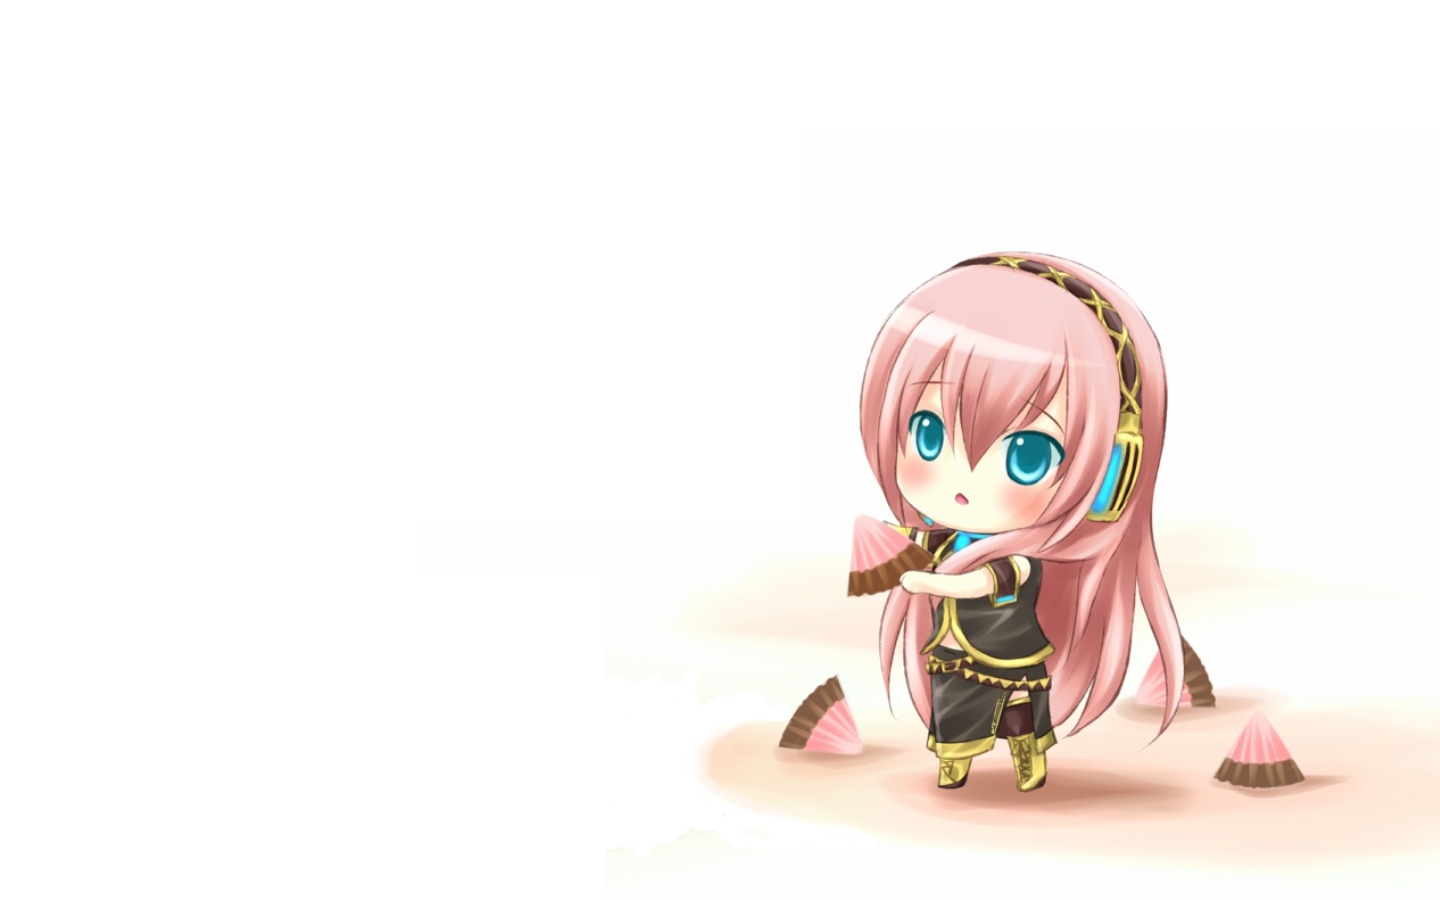 Anime Chibi Vocaloid Cool Wallpaper I HD Image